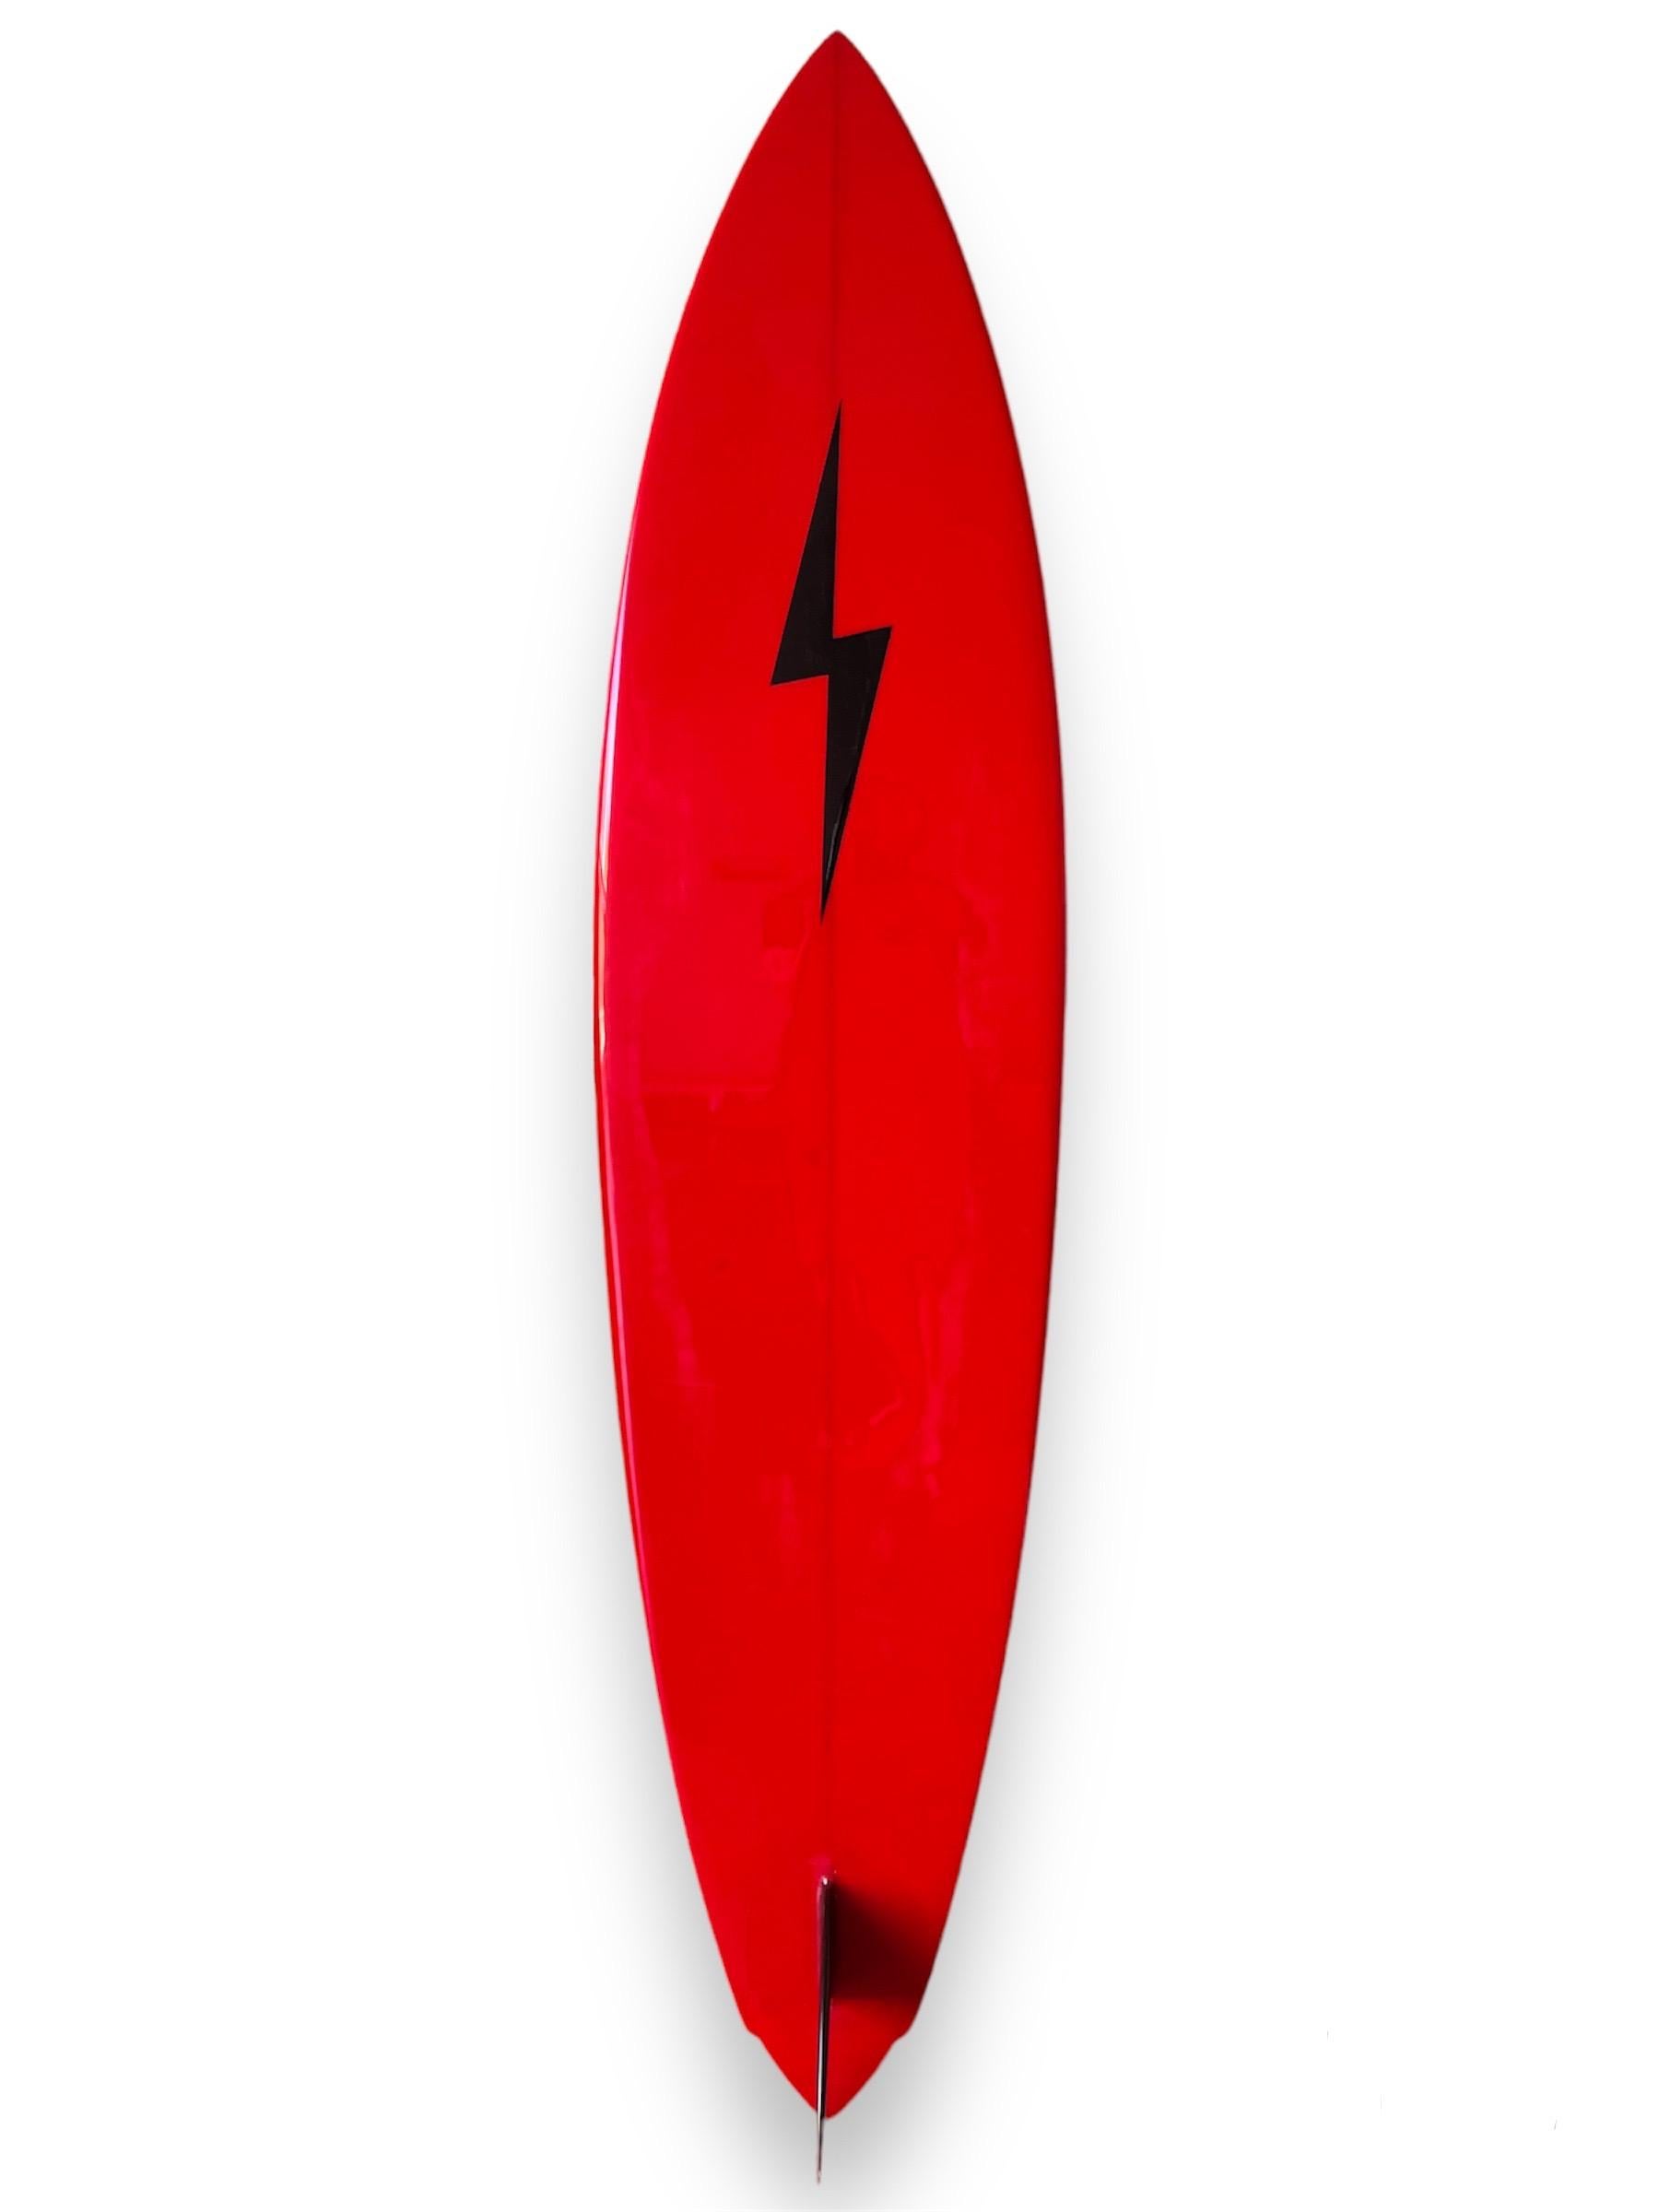 Early-1970s Lightning Bolt surfboard made by Barry Kanaiaupuni. Features large and wide lightning bolt jag design, a telltale sign of the earliest of Lightning Bolt surfboards. Beautiful red lightning bolt with red wrapped rails and pinstriping.